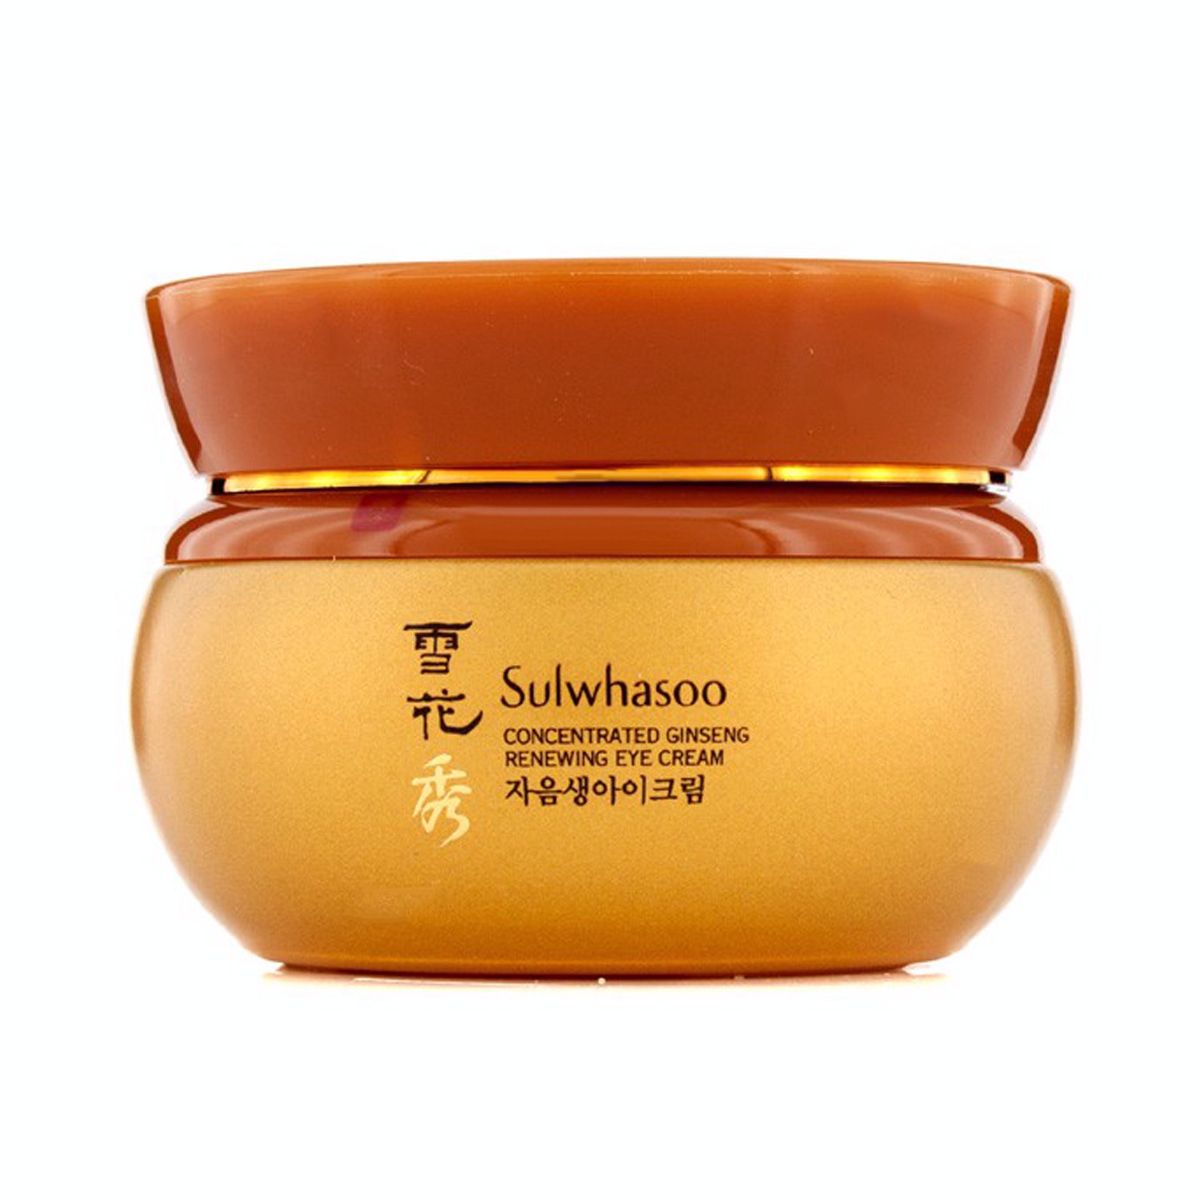 Concentrated Ginseng Renewing Eye Cream (Manufacture Date: 09/2014) Sulwhasoo Image